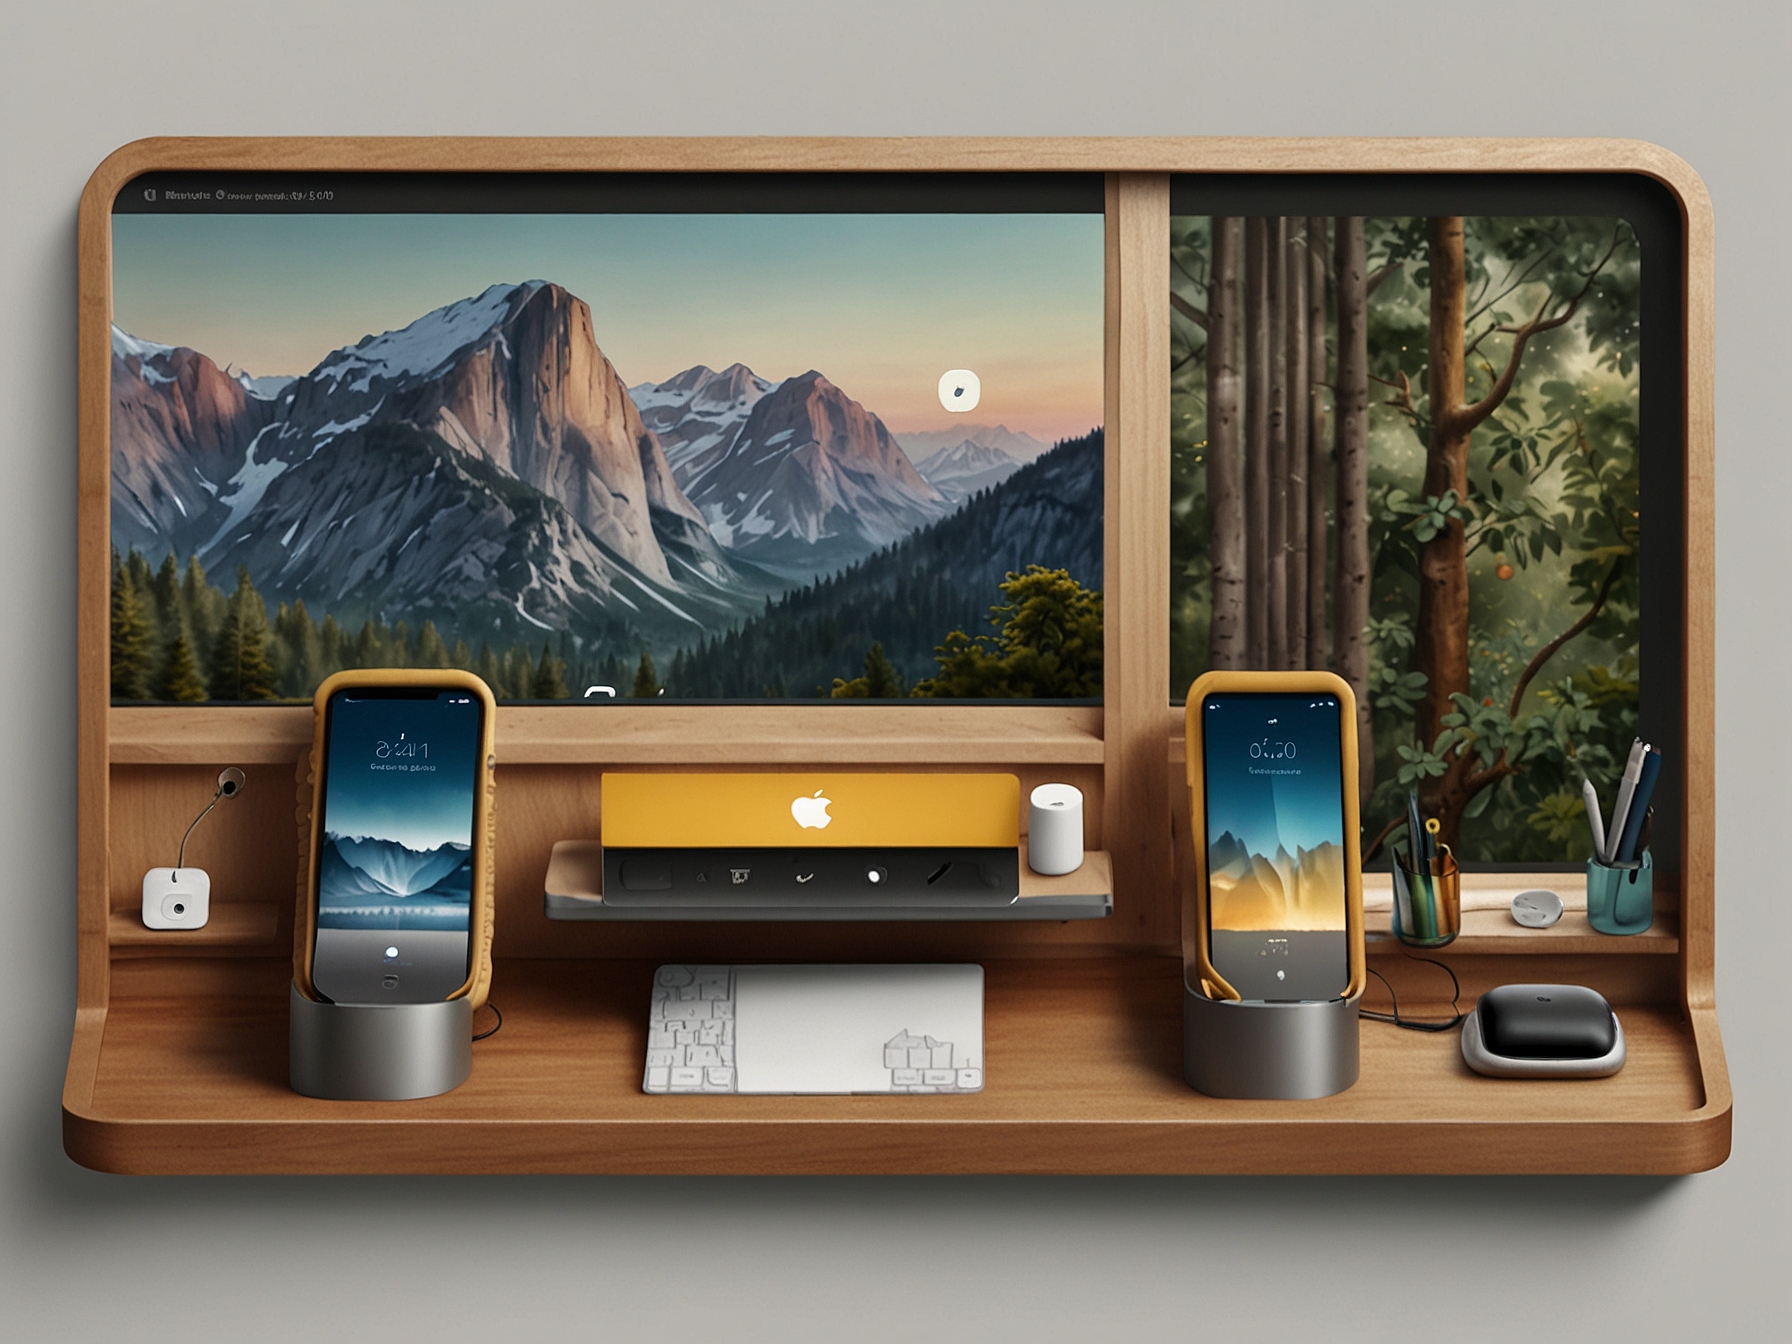 Depiction of Apple's ecosystem, including macOS 16, watchOS 12, and visionOS 3, highlighting the interconnected devices and seamless cross-platform functionality anticipated in the recent updates.